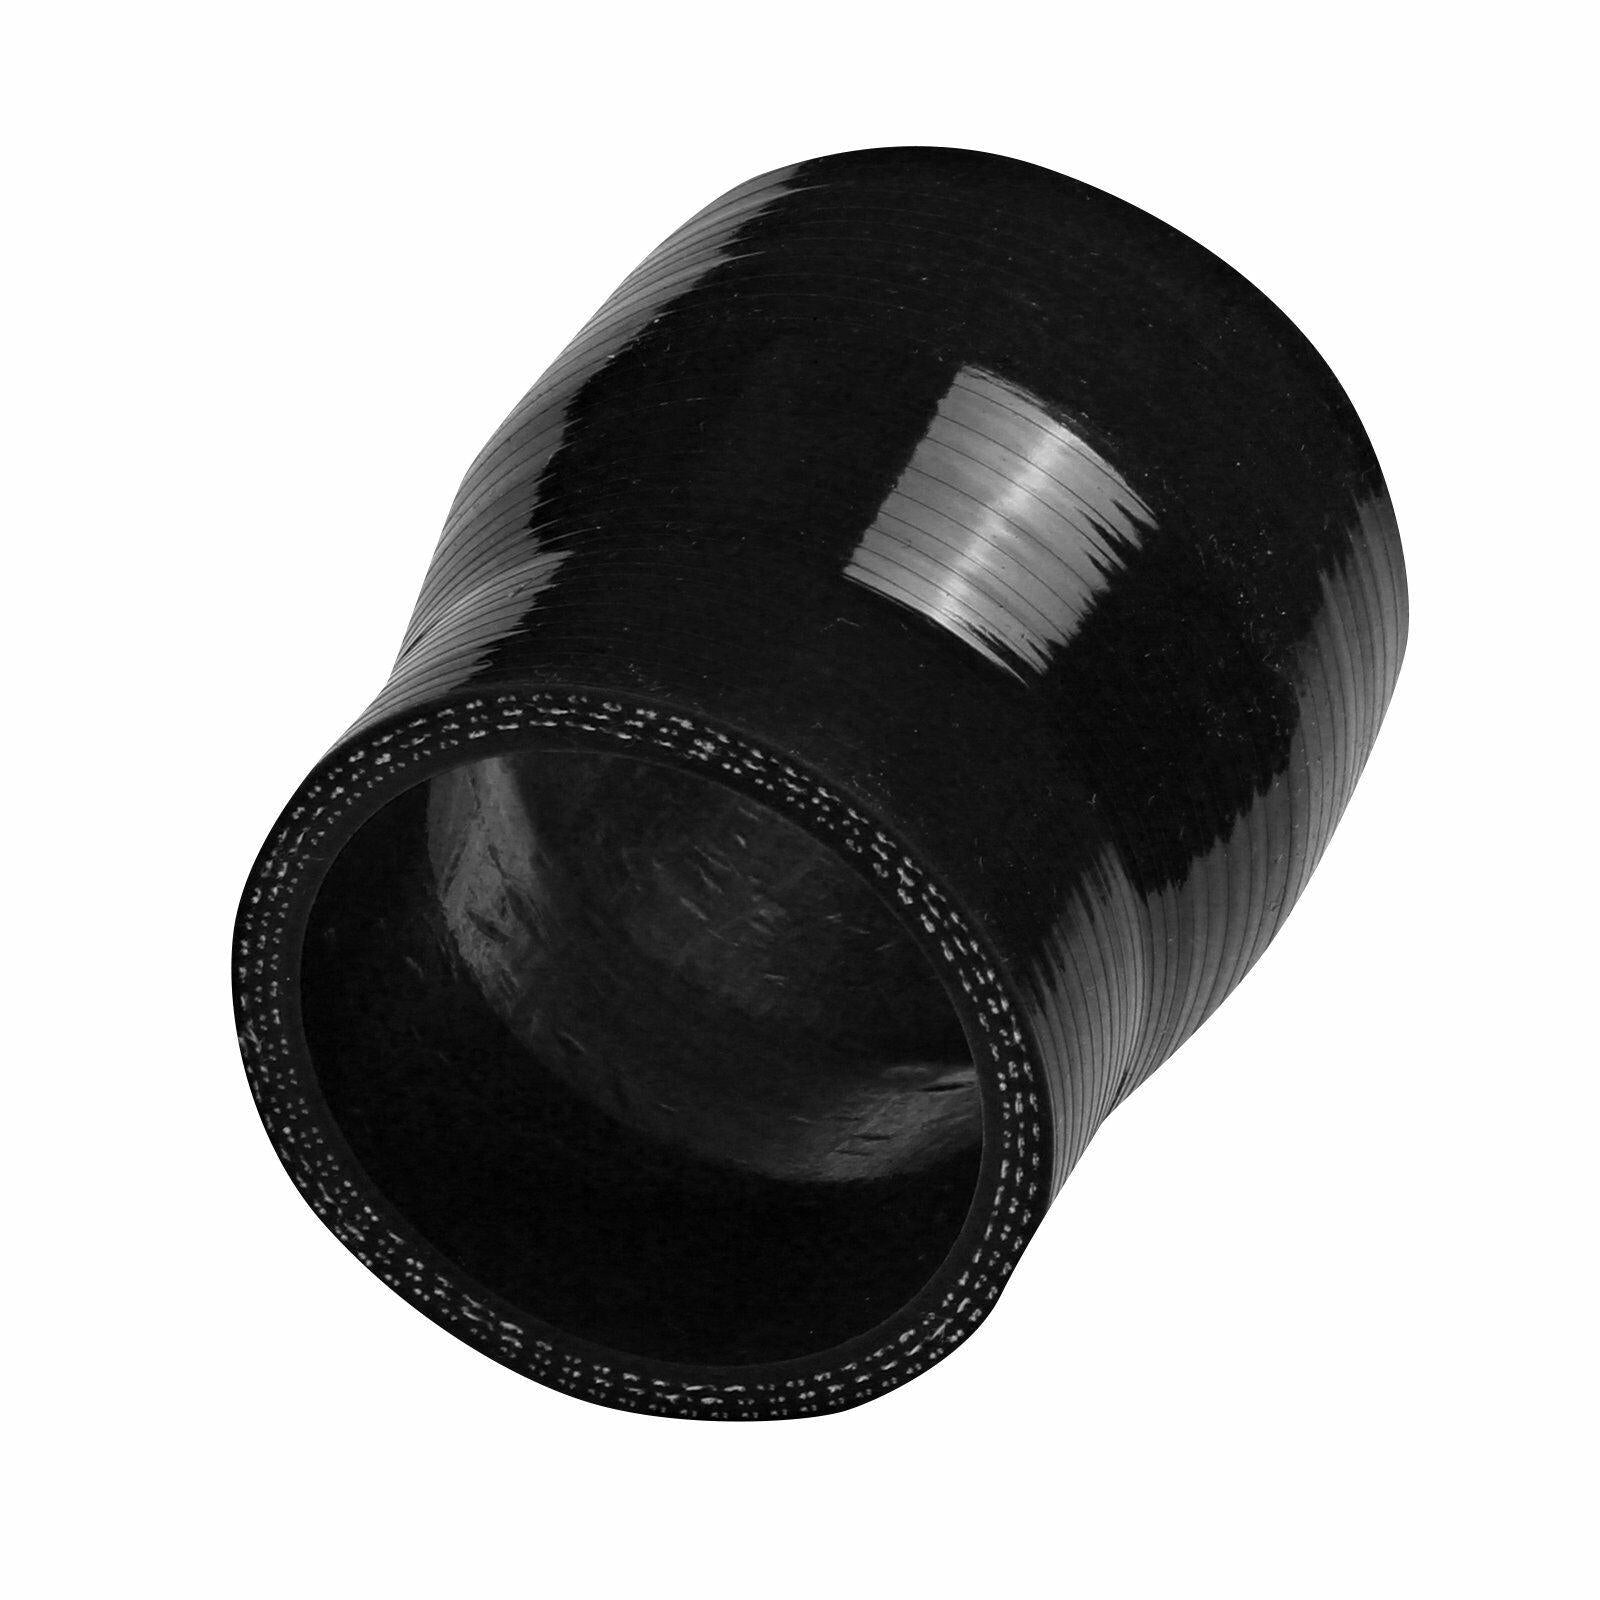 Black 1 1/2" inch 38mm Silicone Straight Hose Coupler Connector Joiner Radiator - www.blackhorse-racing.com